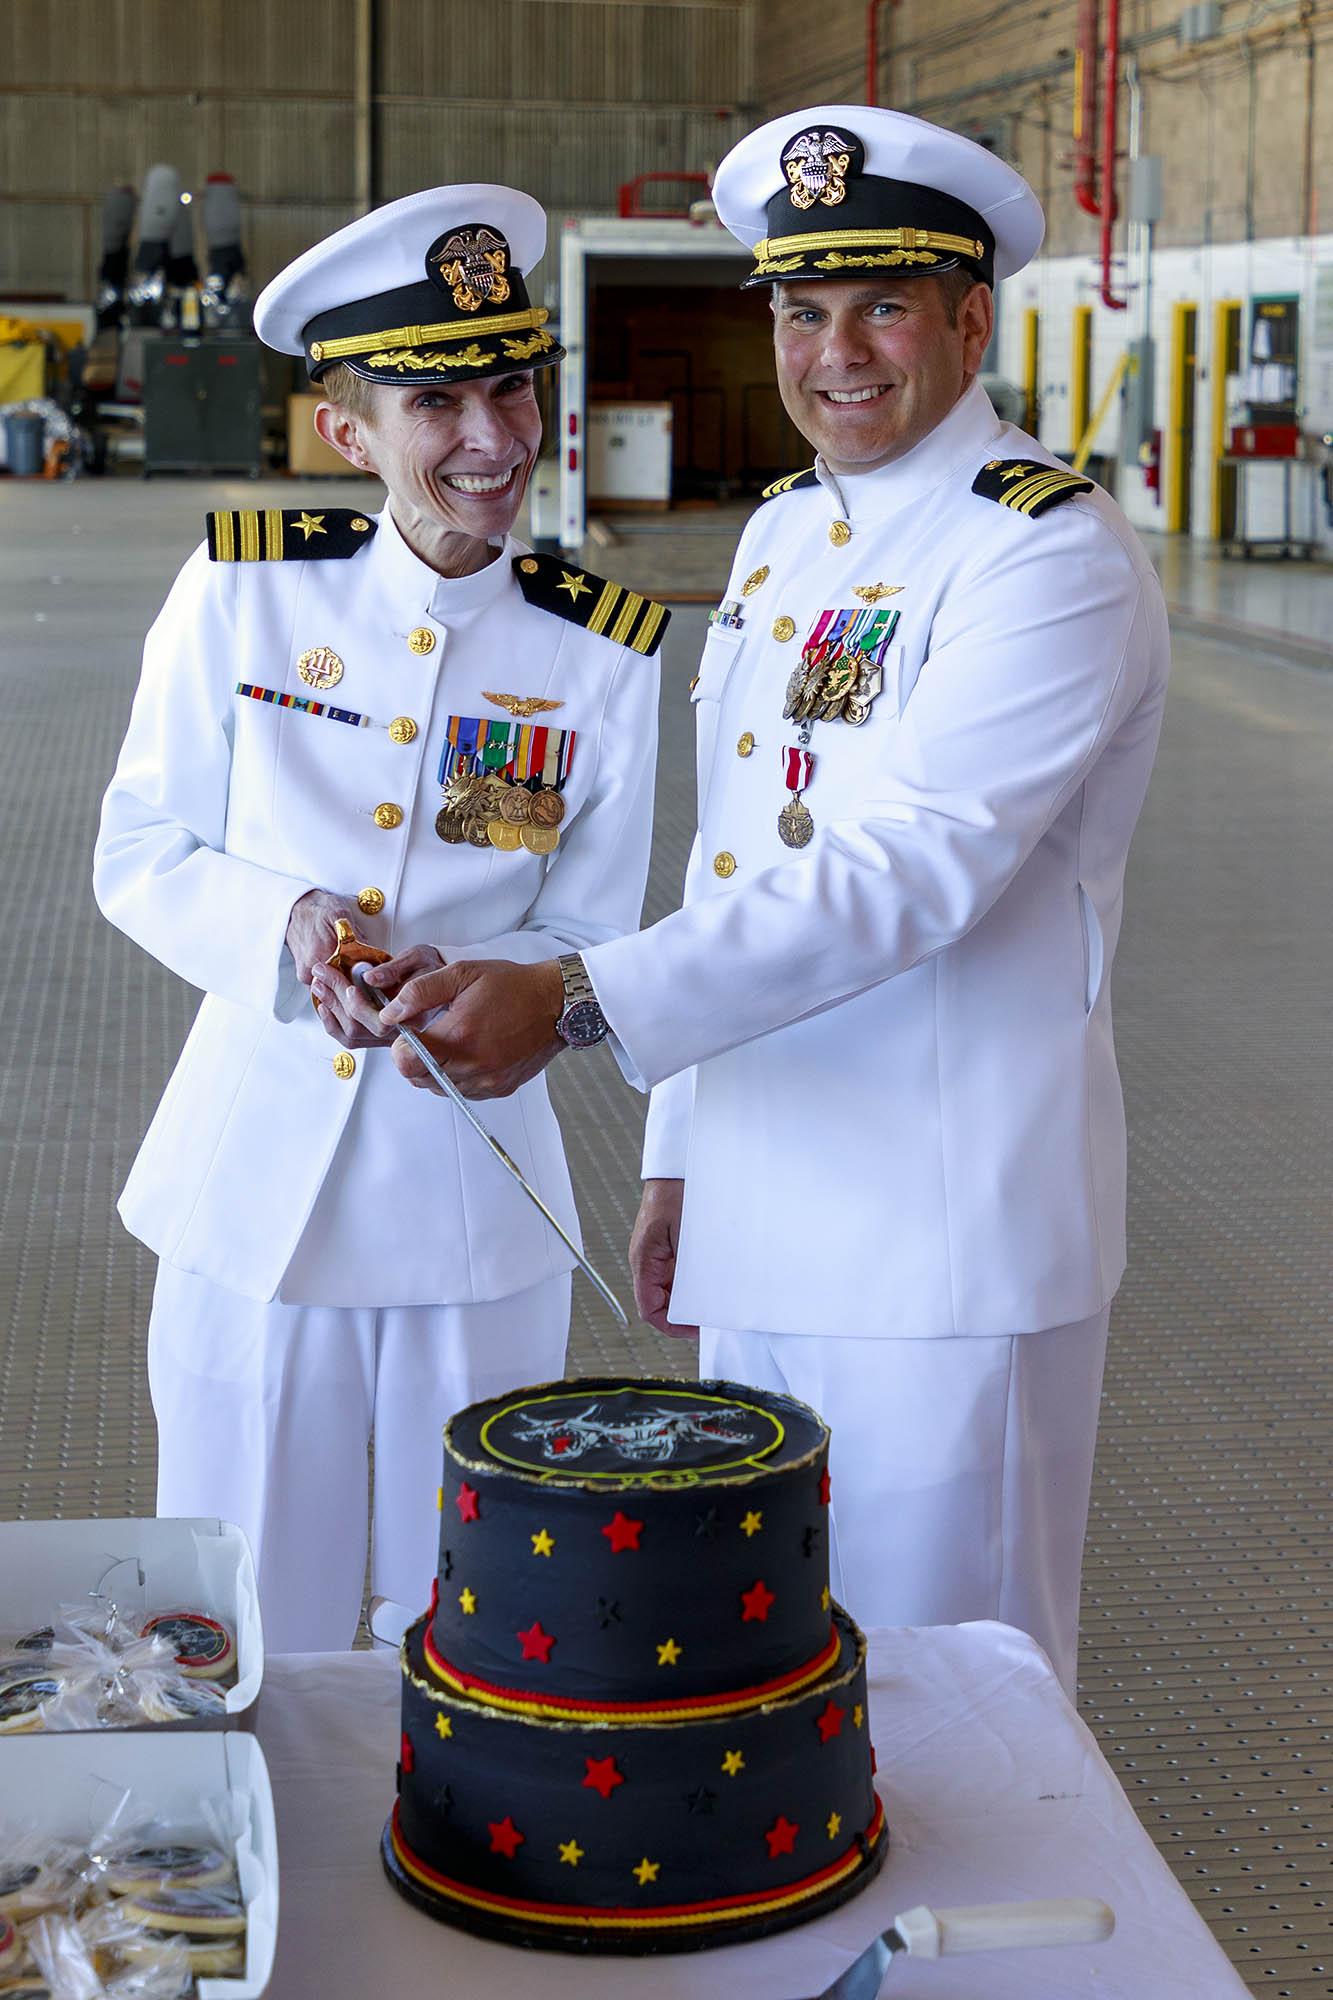 Cmdr. Colette Lazenka and Cmdr. Jason Saglimbene pose for a photo after a May 12 change of command ceremony in which Lazenka relieved Saglimbene of command of Air Test and Evaluation Squadron (VX) 30 in Point Mugu, California. (U.S. Navy photo by Rob Grabendike)